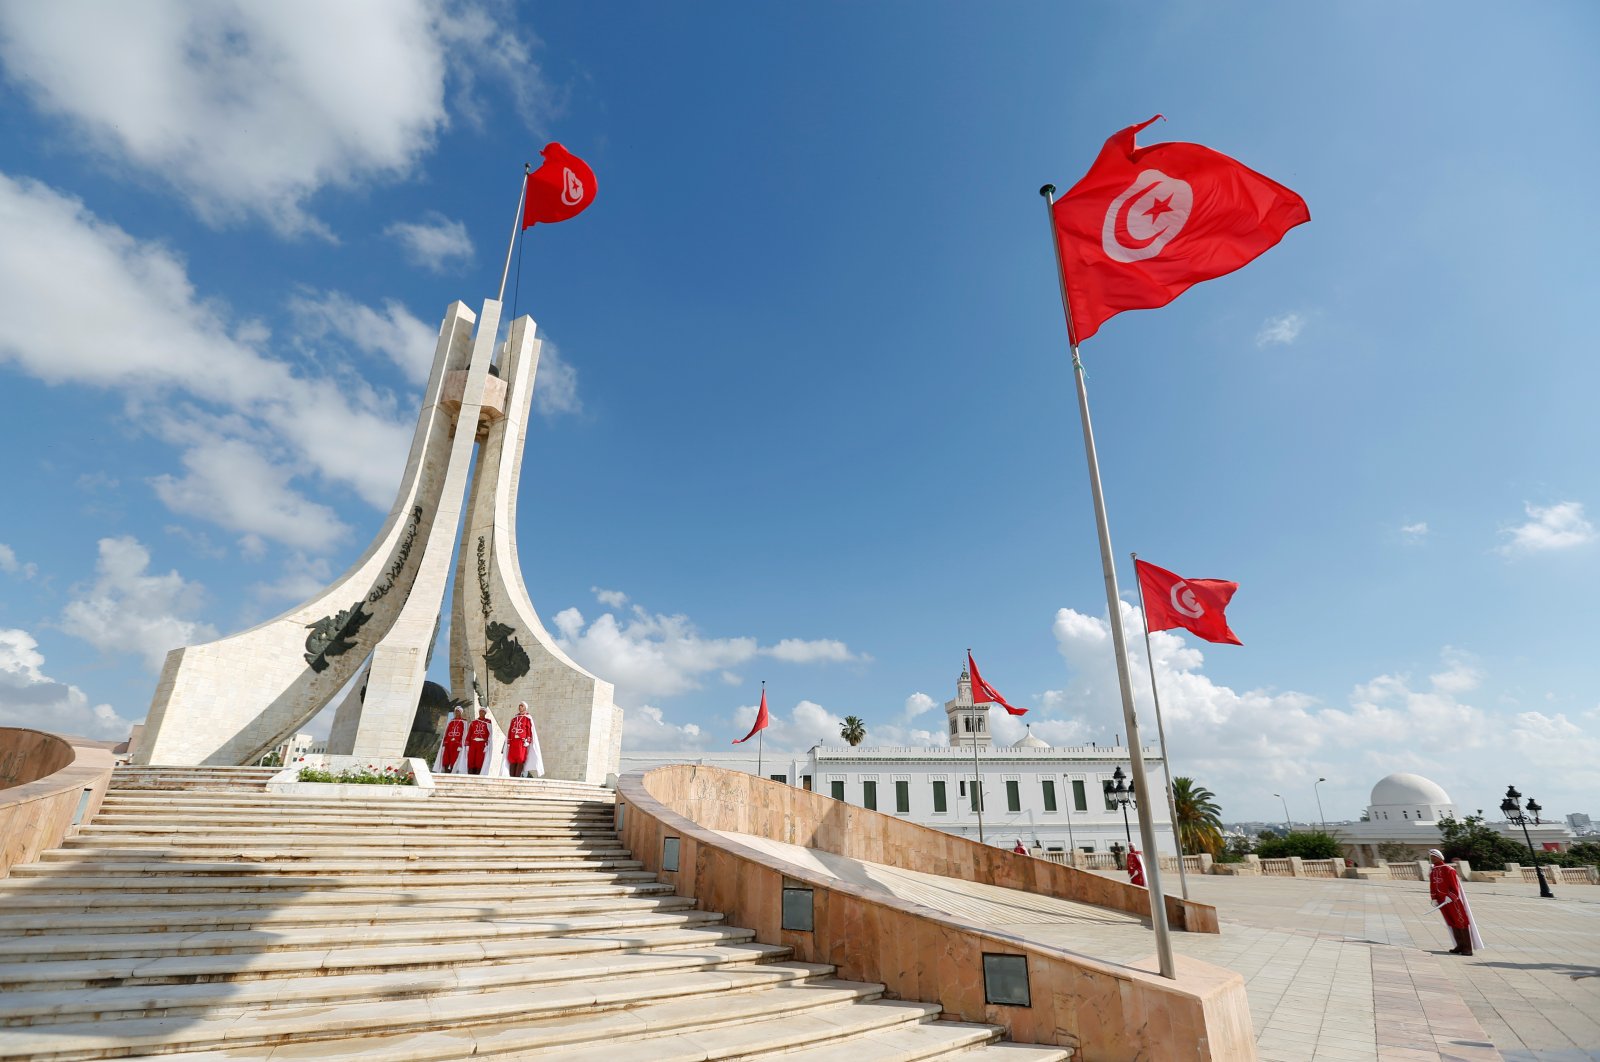 Members of the honor guard stand at attention during a flag-raising in place of Kasba in Tunis, Tunisia, June 26, 2018. (Reuters File Photo)